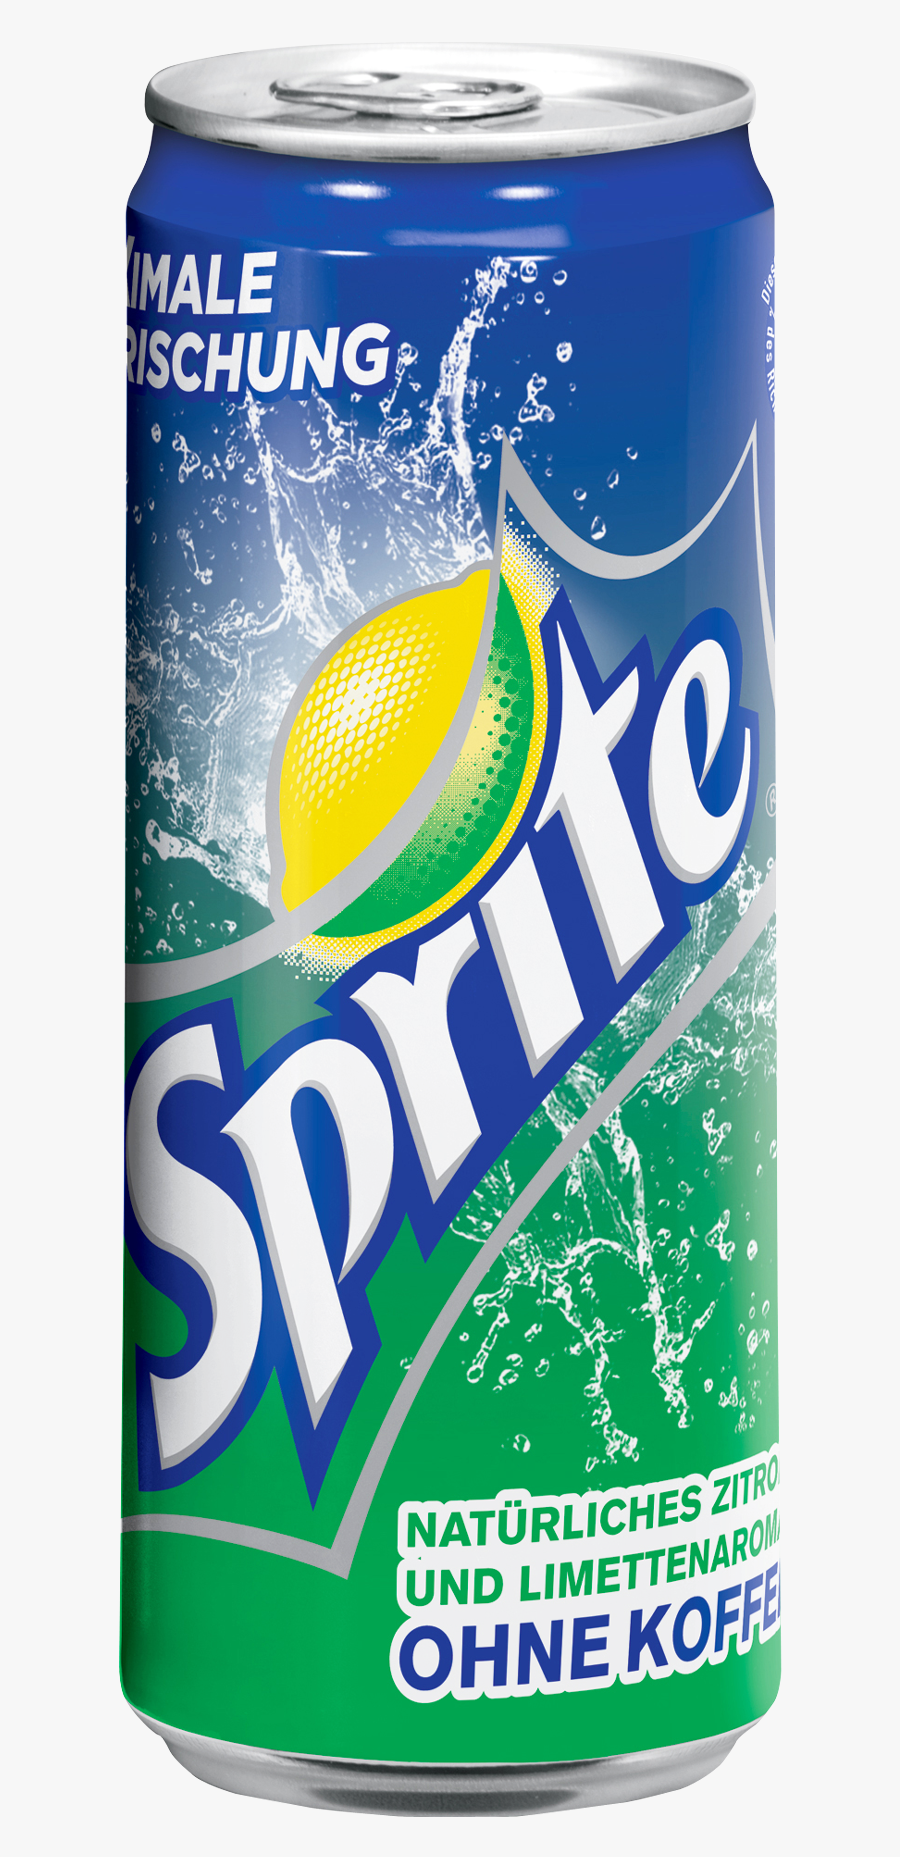 Sprite Clipart Clear Background - Sprite Can Transparent Background, Transparent Clipart